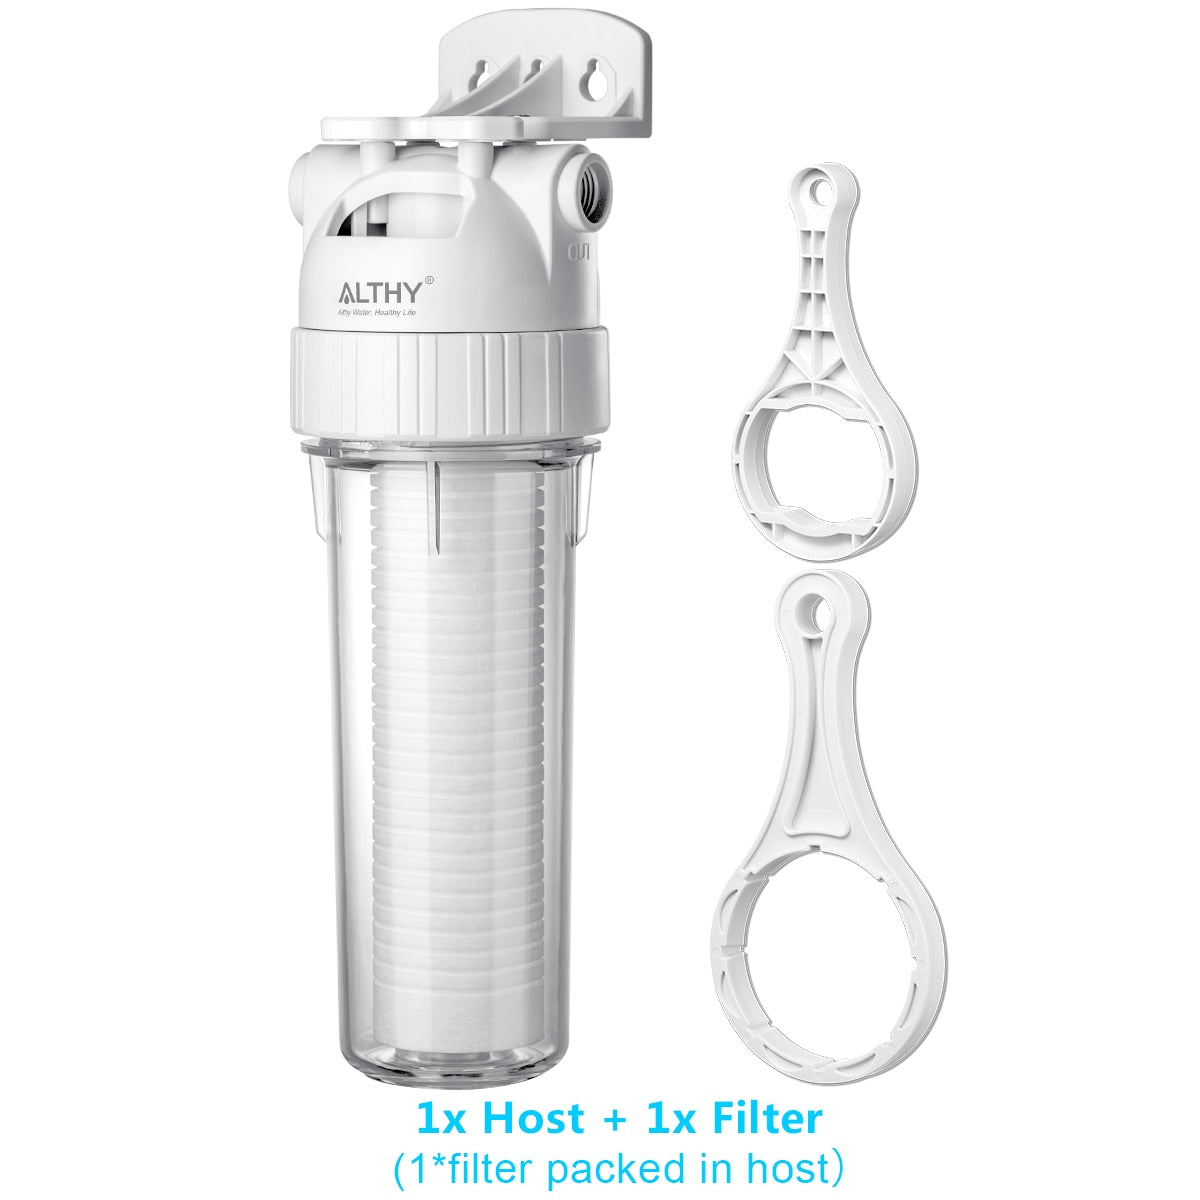 ALTHY 5 Micron Whole House Sediment Water Filter System Prefilter Purifier, 10 Inch PPFcotton Pre filter HostandFilterChina Hardware > Plumbing > Water Dispensing & Filtration 181.99 EZYSELLA SHOP